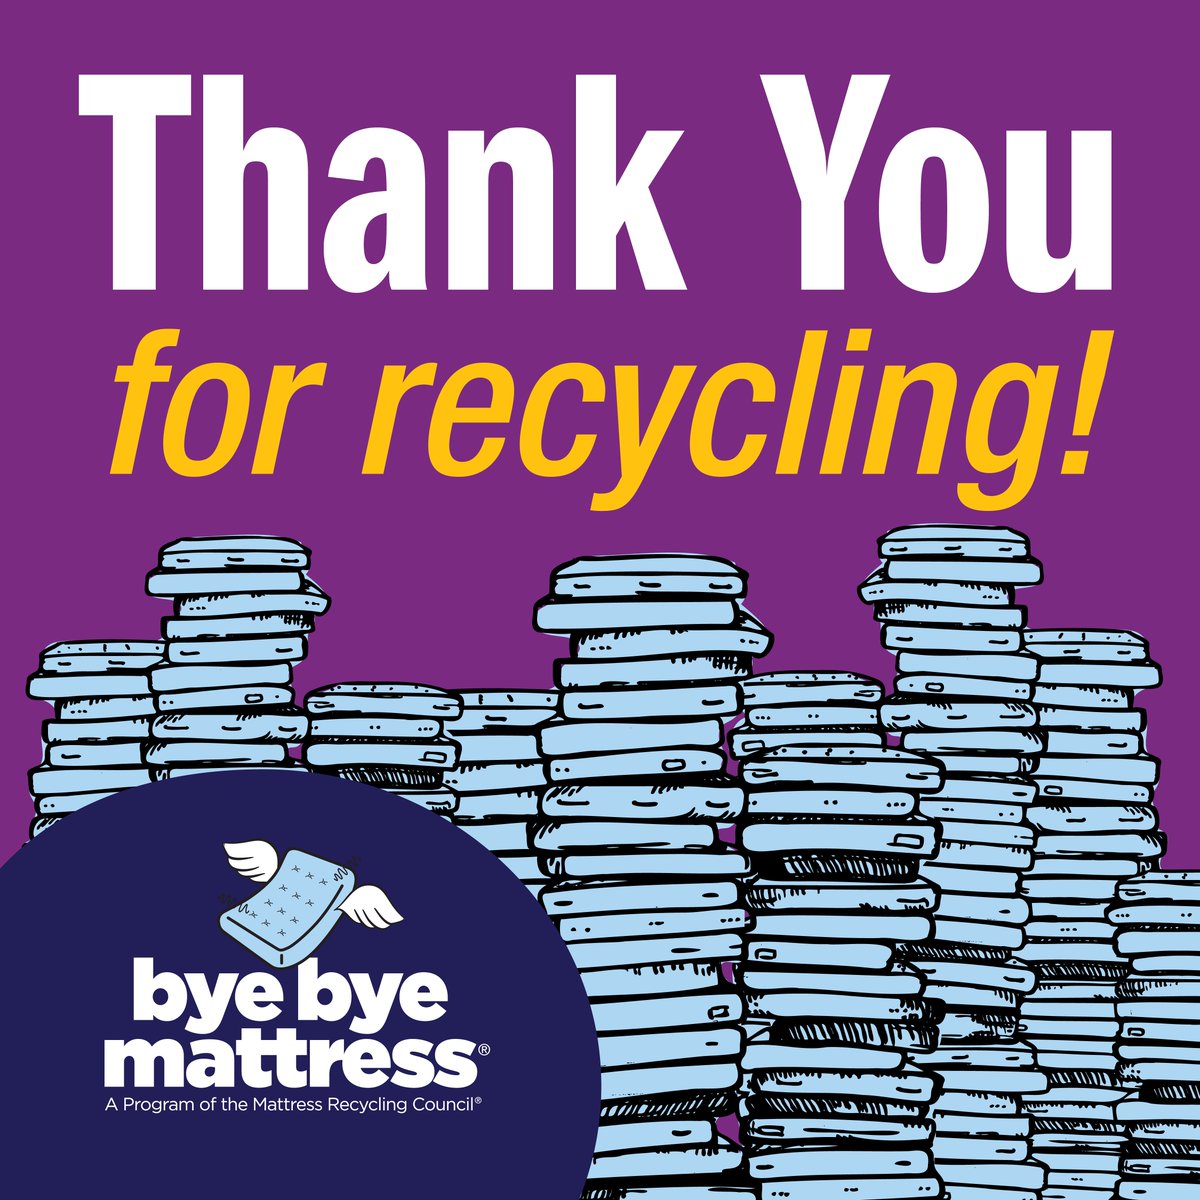 💚 A big THANK YOU to all supporting Bye Bye Mattress! Your commitment to our mission means the world. ♻️ #MattressRecycling